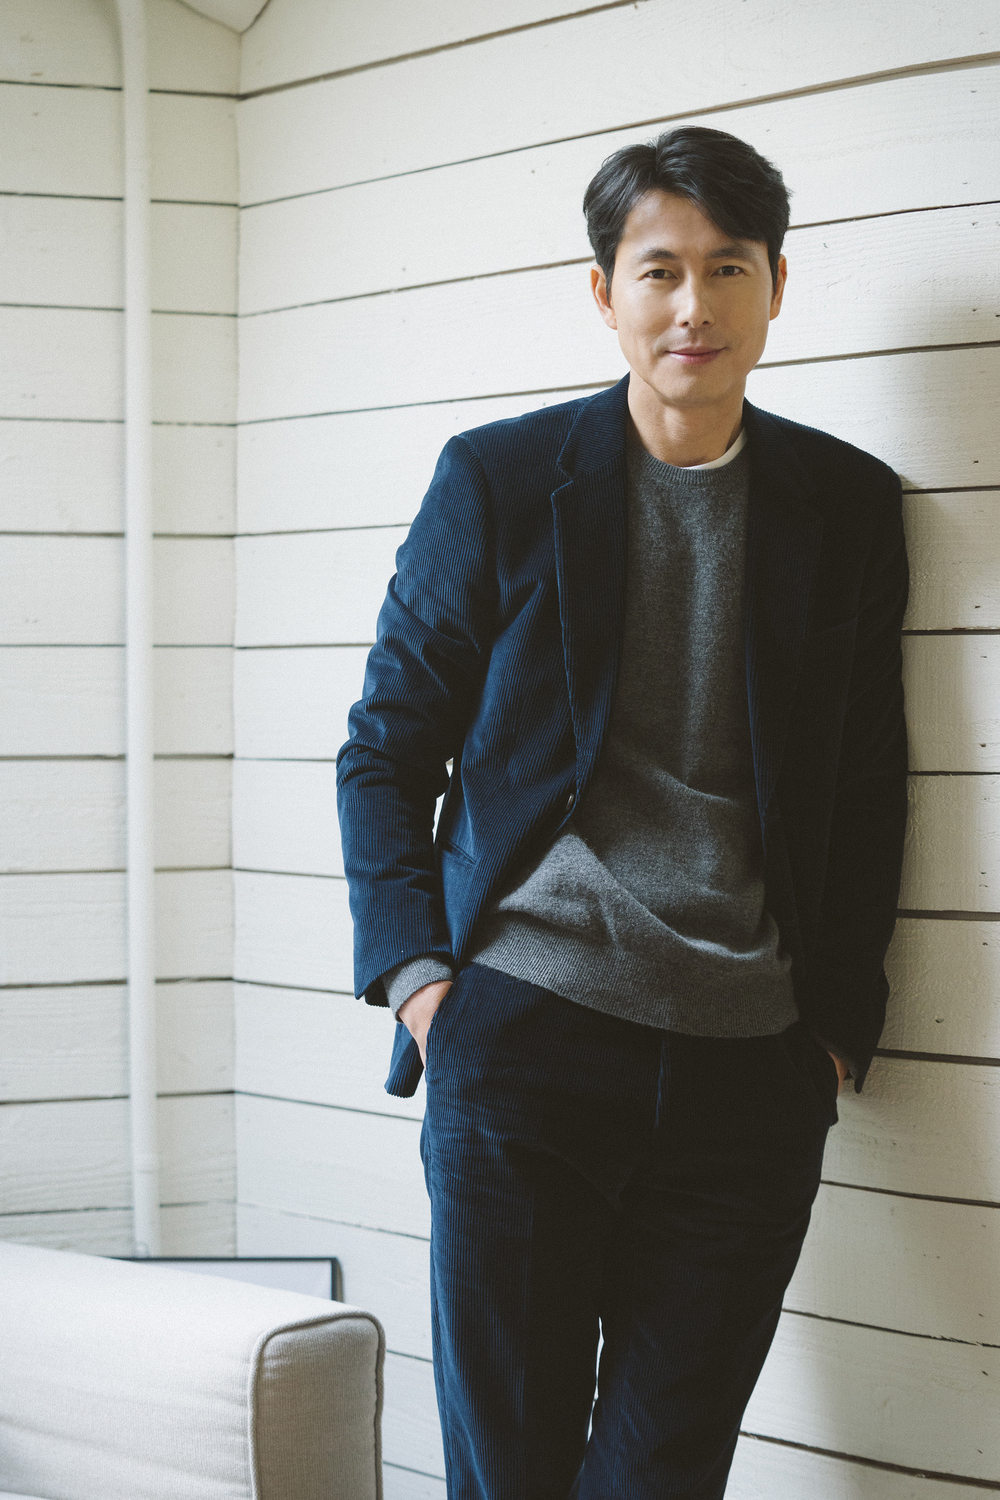 You shouldnt be weighed down by the weight of responsibility.Actor Jung Woo-sung, who appeared in the movie Witness, once again revealed his Xiao Xin at an interview held at a cafe in Samcheong-dong on the morning of January 22.Jung Woo-sung, who said that he does not have to reveal his Xiao Xin at present, asked, What if I have to give up as an actor to protect my professional ethics like Sun Ho in the play? Soon Ho seems to be a story with discrimination between occupation, actor, and publicness.  It seems to be true that you have to take responsibility.But I need consciousness, he said.Jung Woo-sung said that big decisions can not change everything. Jung Woo-sung said, I do not think all of them need to be big.There are many commercial movie scenarios.So, I do not think this is all I have to do, but this is a movie I have done before, so I think it is in the category of Choices to know whether to put a scenario for a junior actor.And even small-budget or non-commercial films, the Choices, which can distribute my experience when new filmmakers who have no more experience than I do, plan and prepare those things, seem to affect the overall atmosphere.It does not seem like only a big decision changes everything. For example, Bit brought me a lot, but it was a movie that consciously recognized the social wave of the movie and the influence that an actor can have.So I wanted to not promote the movie.At that time, there were a lot of gang movies, and there were many such things as the beautification of violence. I did not want to do it myself, but I do not think that my own decisions, the standards for small decisions, become Xiao Xin, and when they accumulate, I think that they will exist as a small area in the overall atmosphere within me and the group he belongs to. Jung Woo-sung also spoke his mind about some public gazes that overestimated his responsibility as an actor.Jung Woo-sung said: You shouldnt be weighed by the weight of responsibility, it seems you need to look at everything at a reasonable distance.I think that when I take care of these things objectively and at a distance from my consciousness when I am a filmmaker who has been in charge of my responsibility for more than 25 years now, I think that there will be a power to objectively drag me without being overwhelmed by its responsibility and weight. bak-beauty